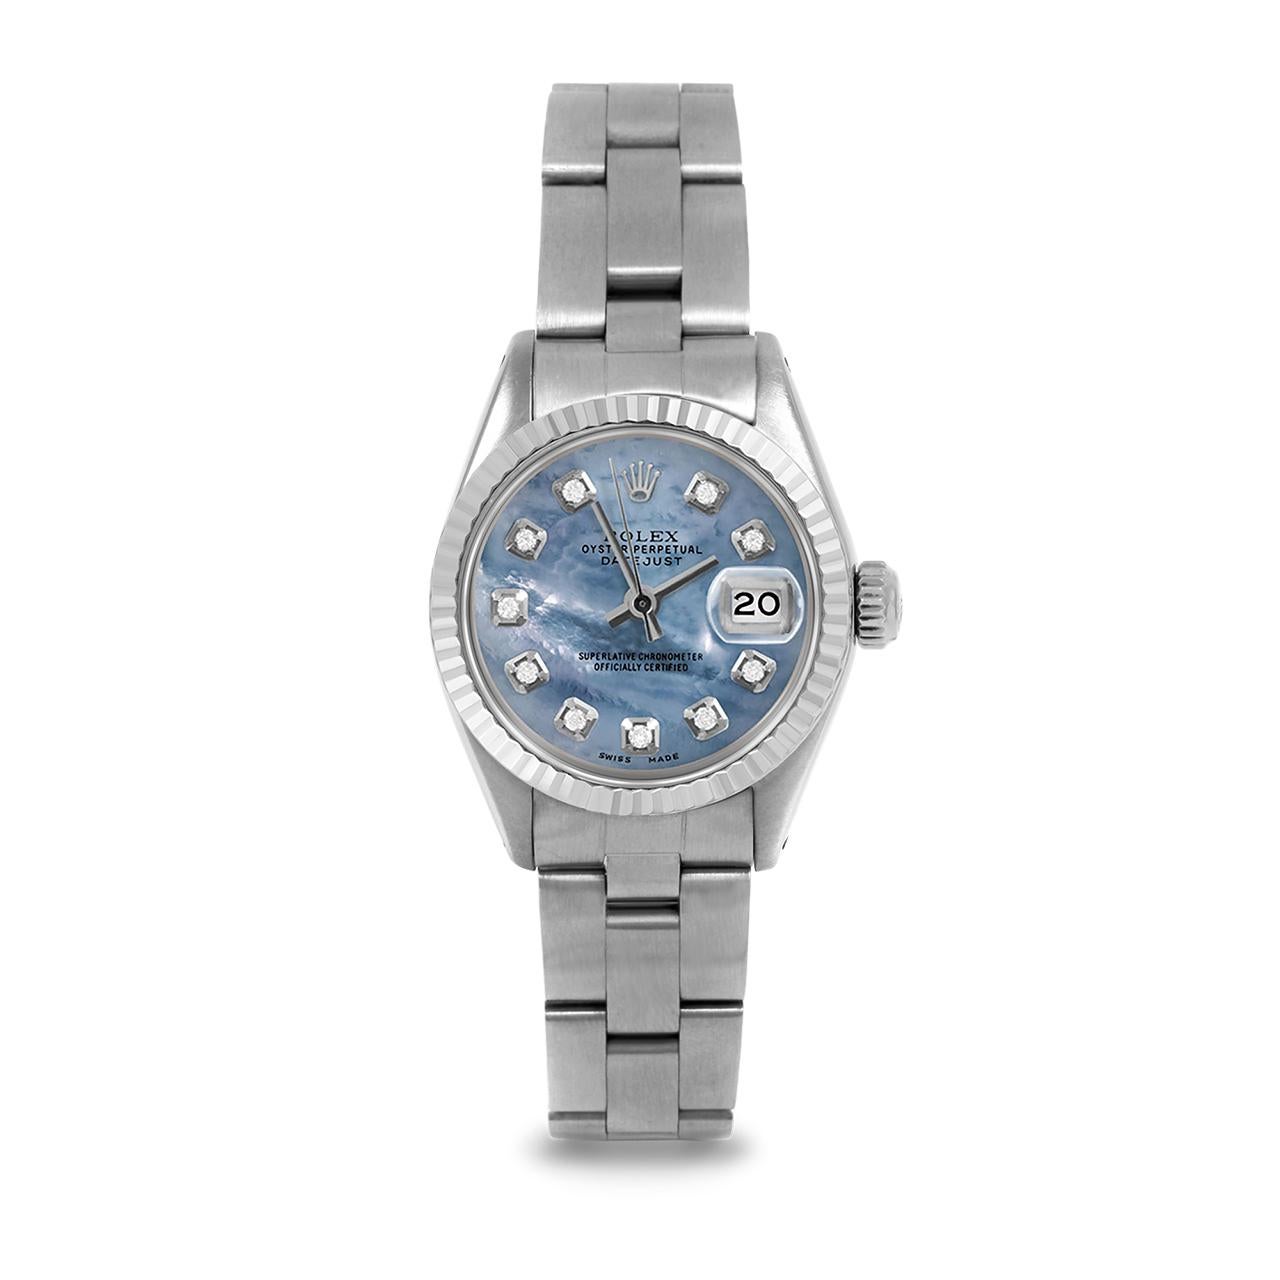 Pre-Owned Rolex 6917 Ladies 26mm Datejust Watch, Custom Blue Mother of Pearl Diamond Dial & Fluted Bezel on Rolex Stainless Steel Oyster Band.   

SKU 6917-SS-BLMOP-DIA-AM-FLT-OYS


Brand/Model:        Rolex Datejust
Model Number:        6917
Style: